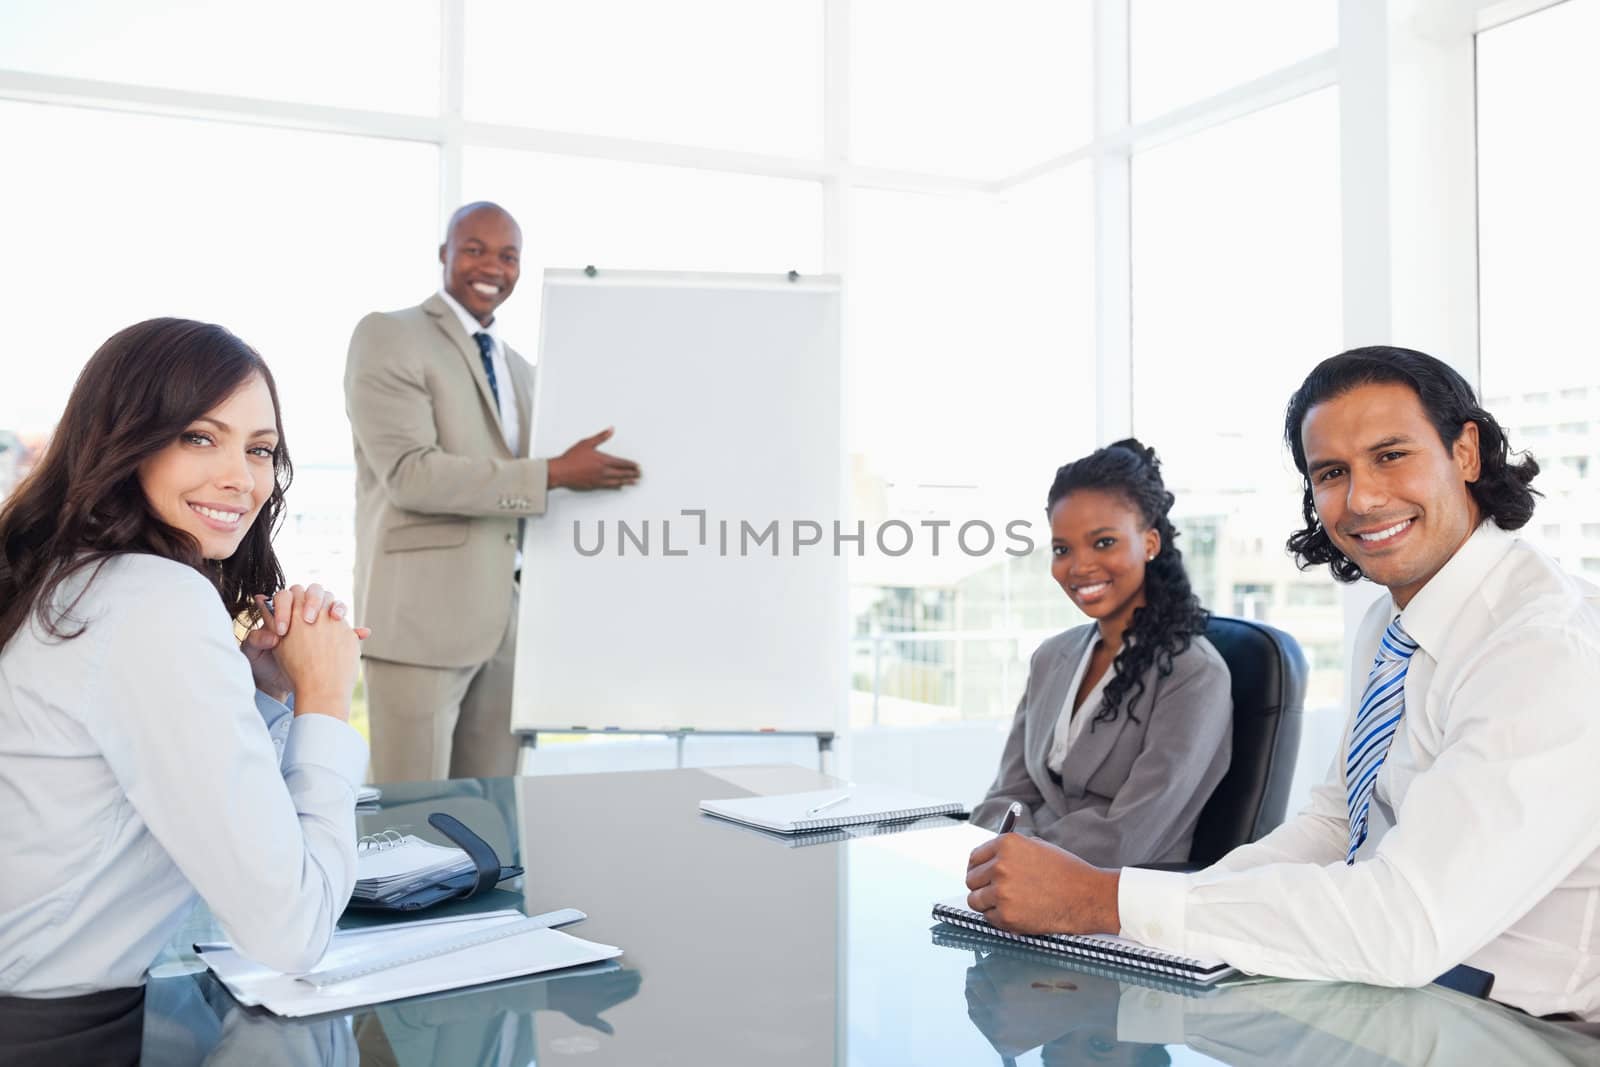 Smiling executive showing a flipchart with his relaxed colleagues